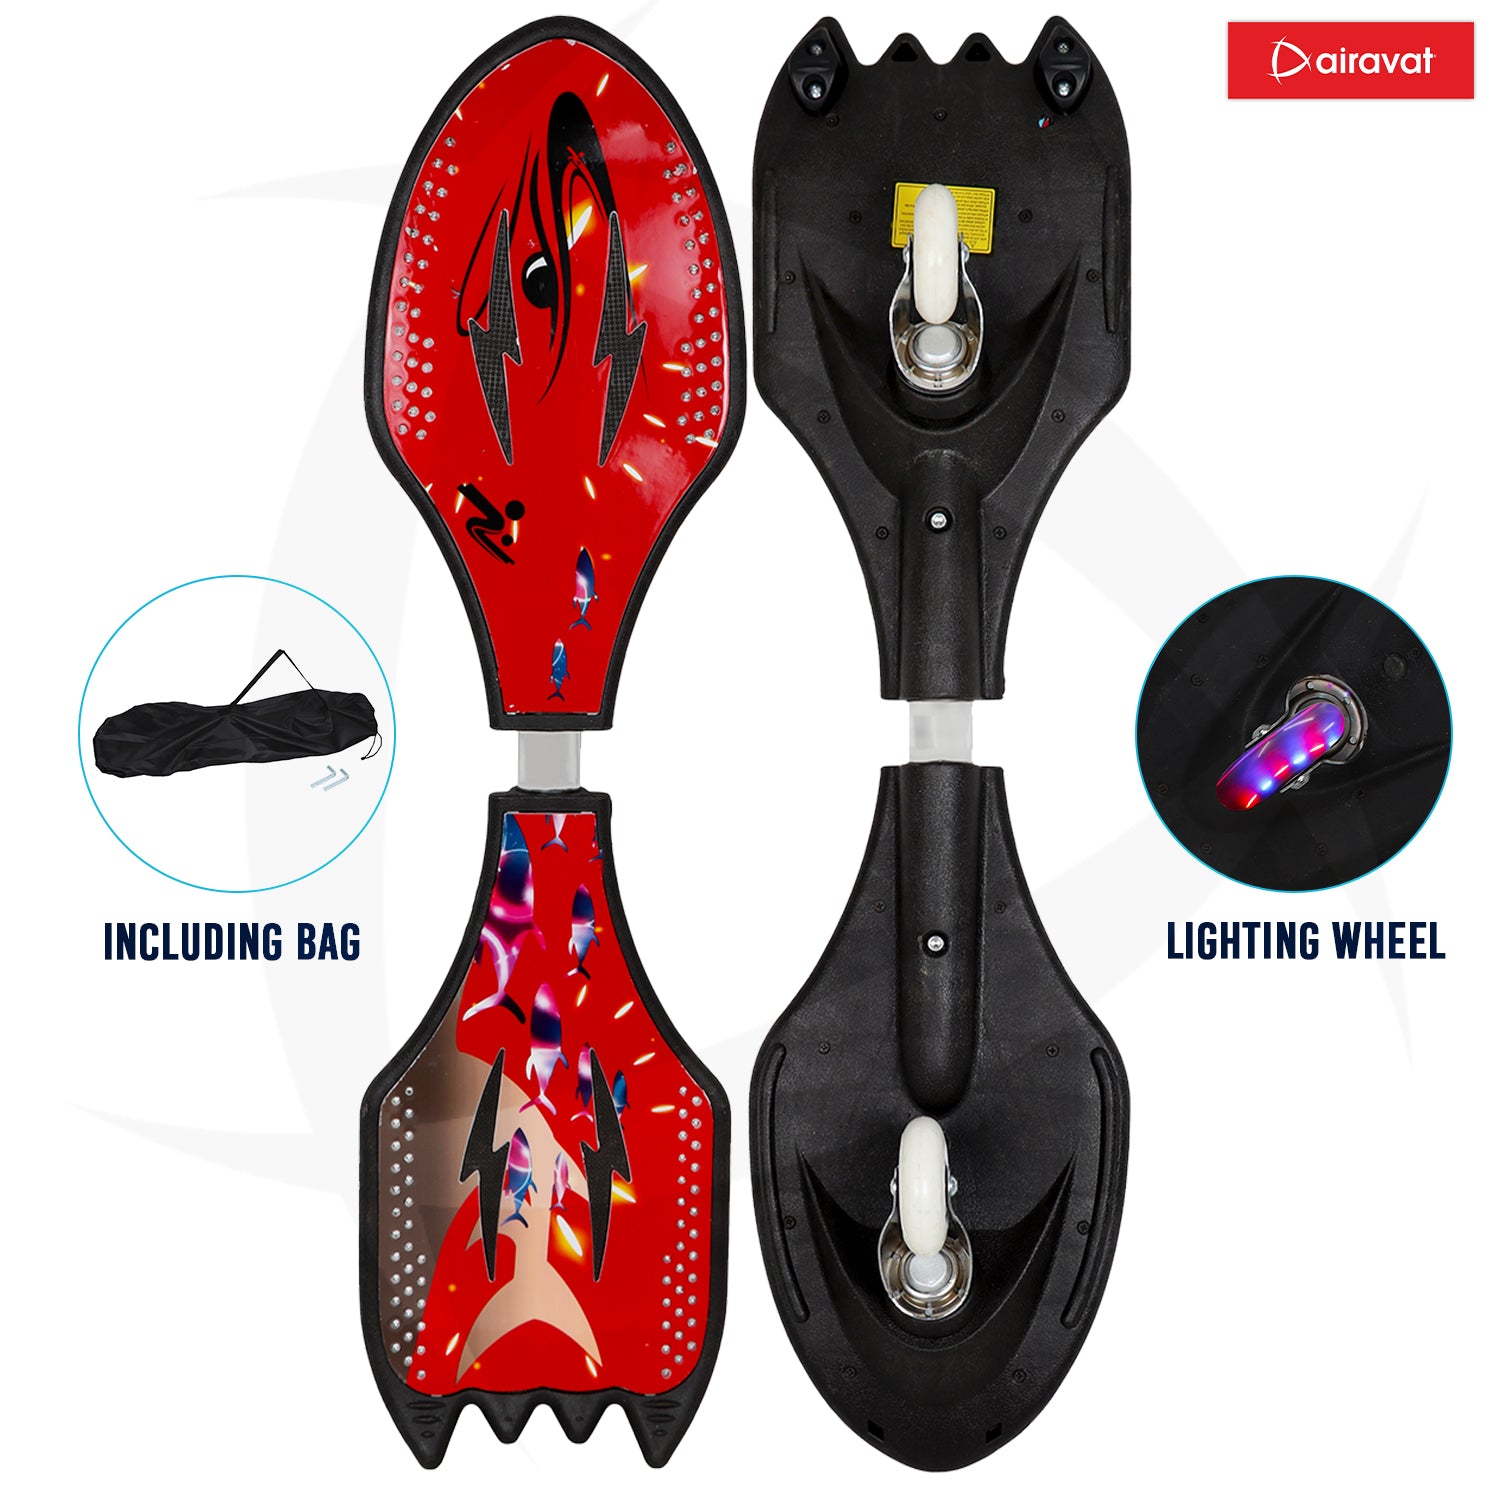 waveboard main image include red